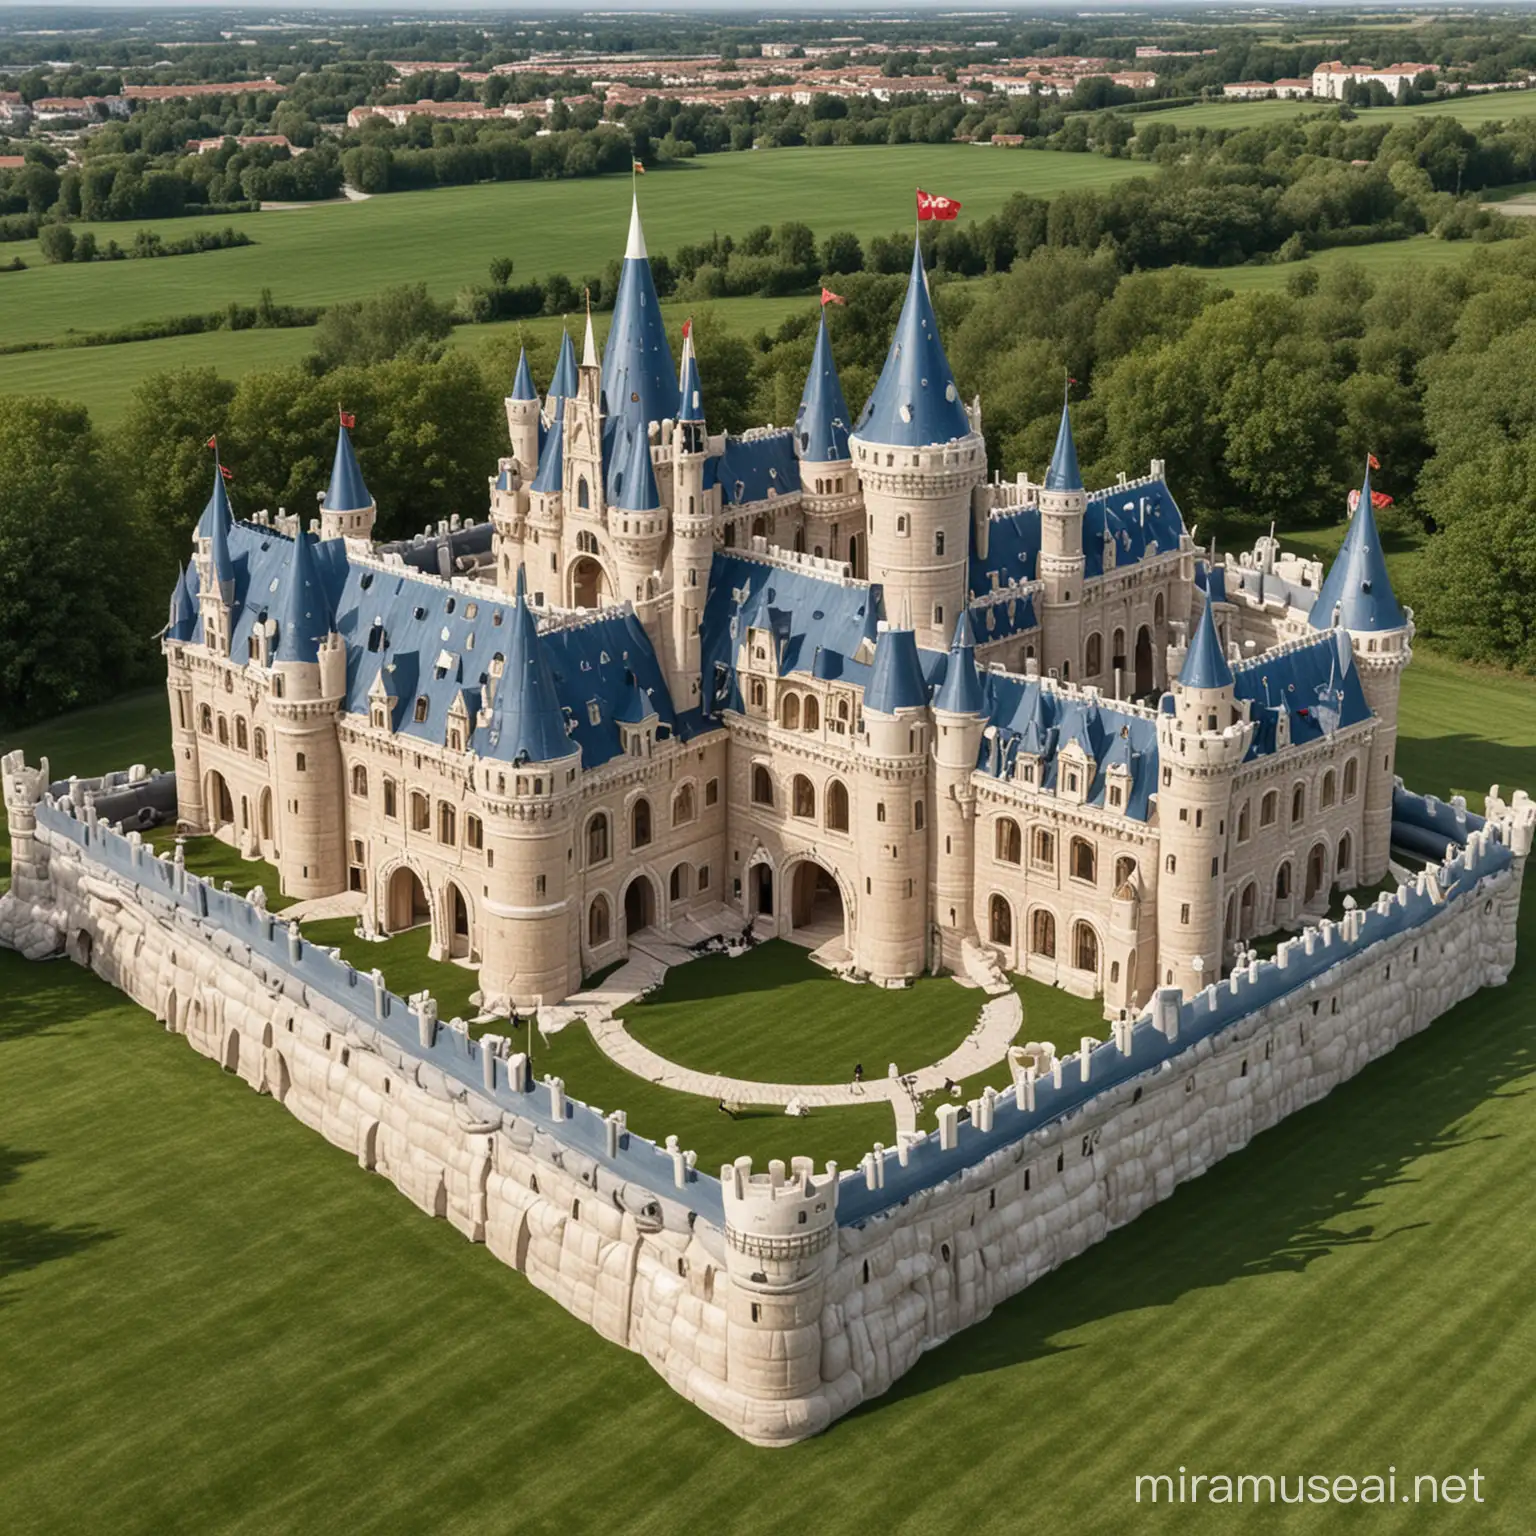 Massive inflatable castle home
